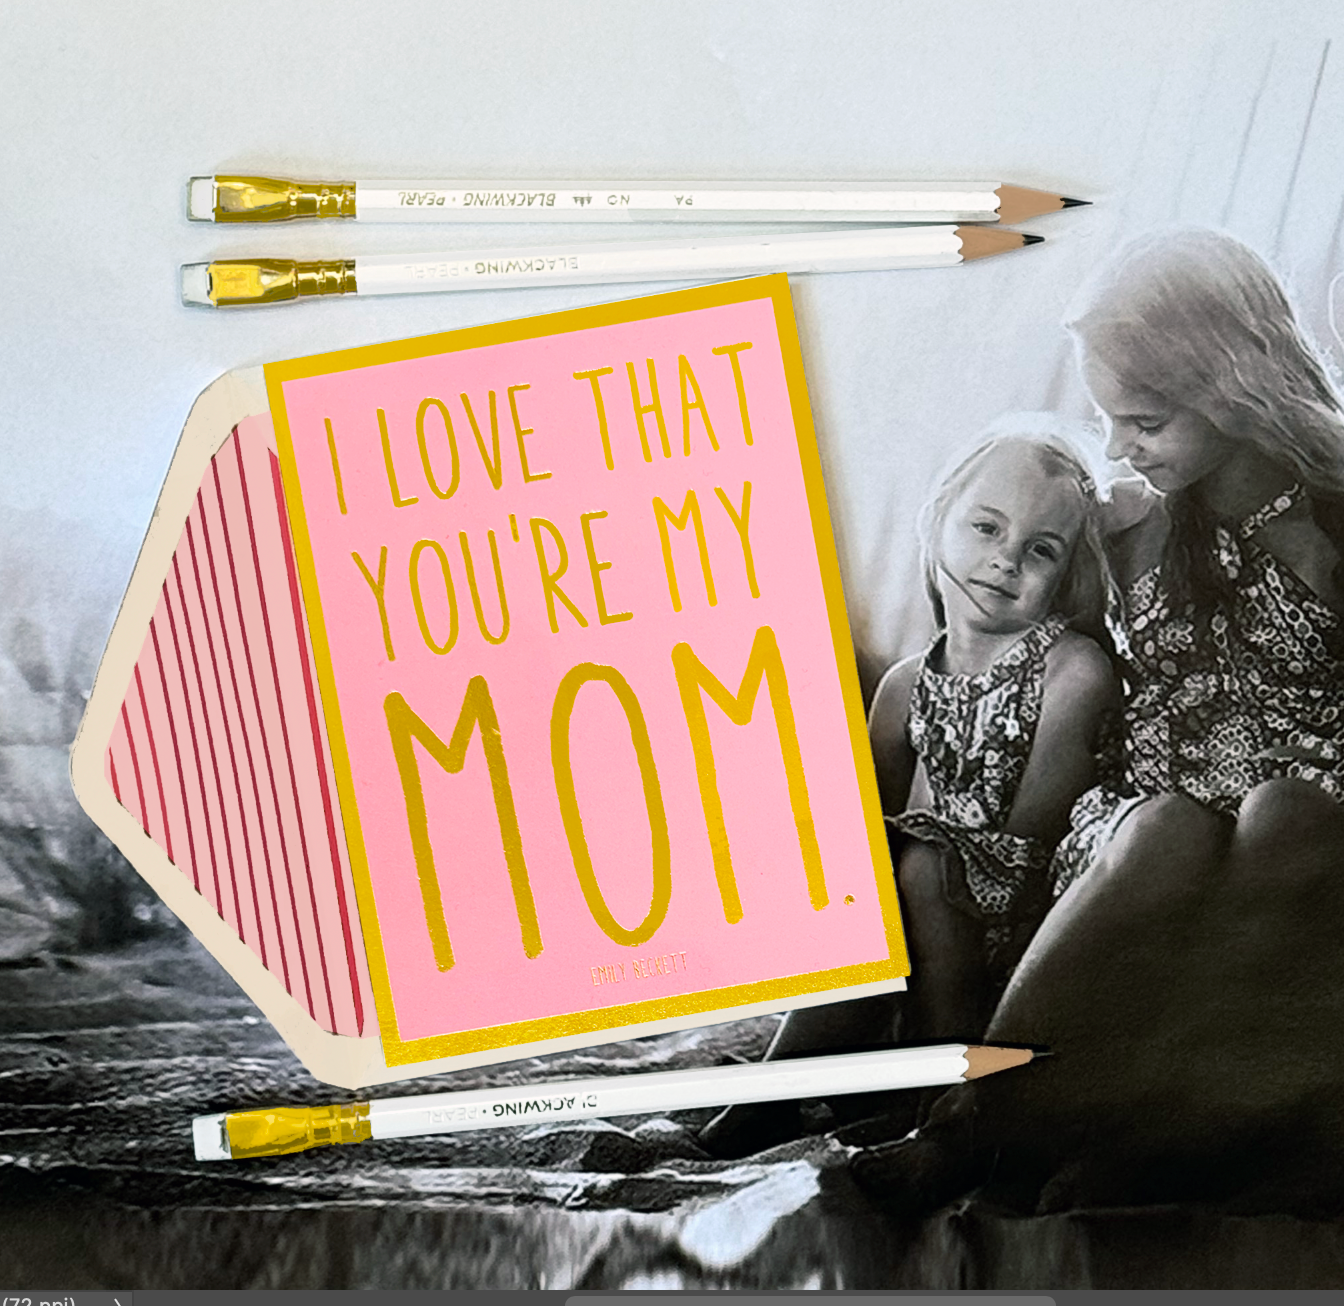 I Love That You're My Mom Greeting Card, Single Card